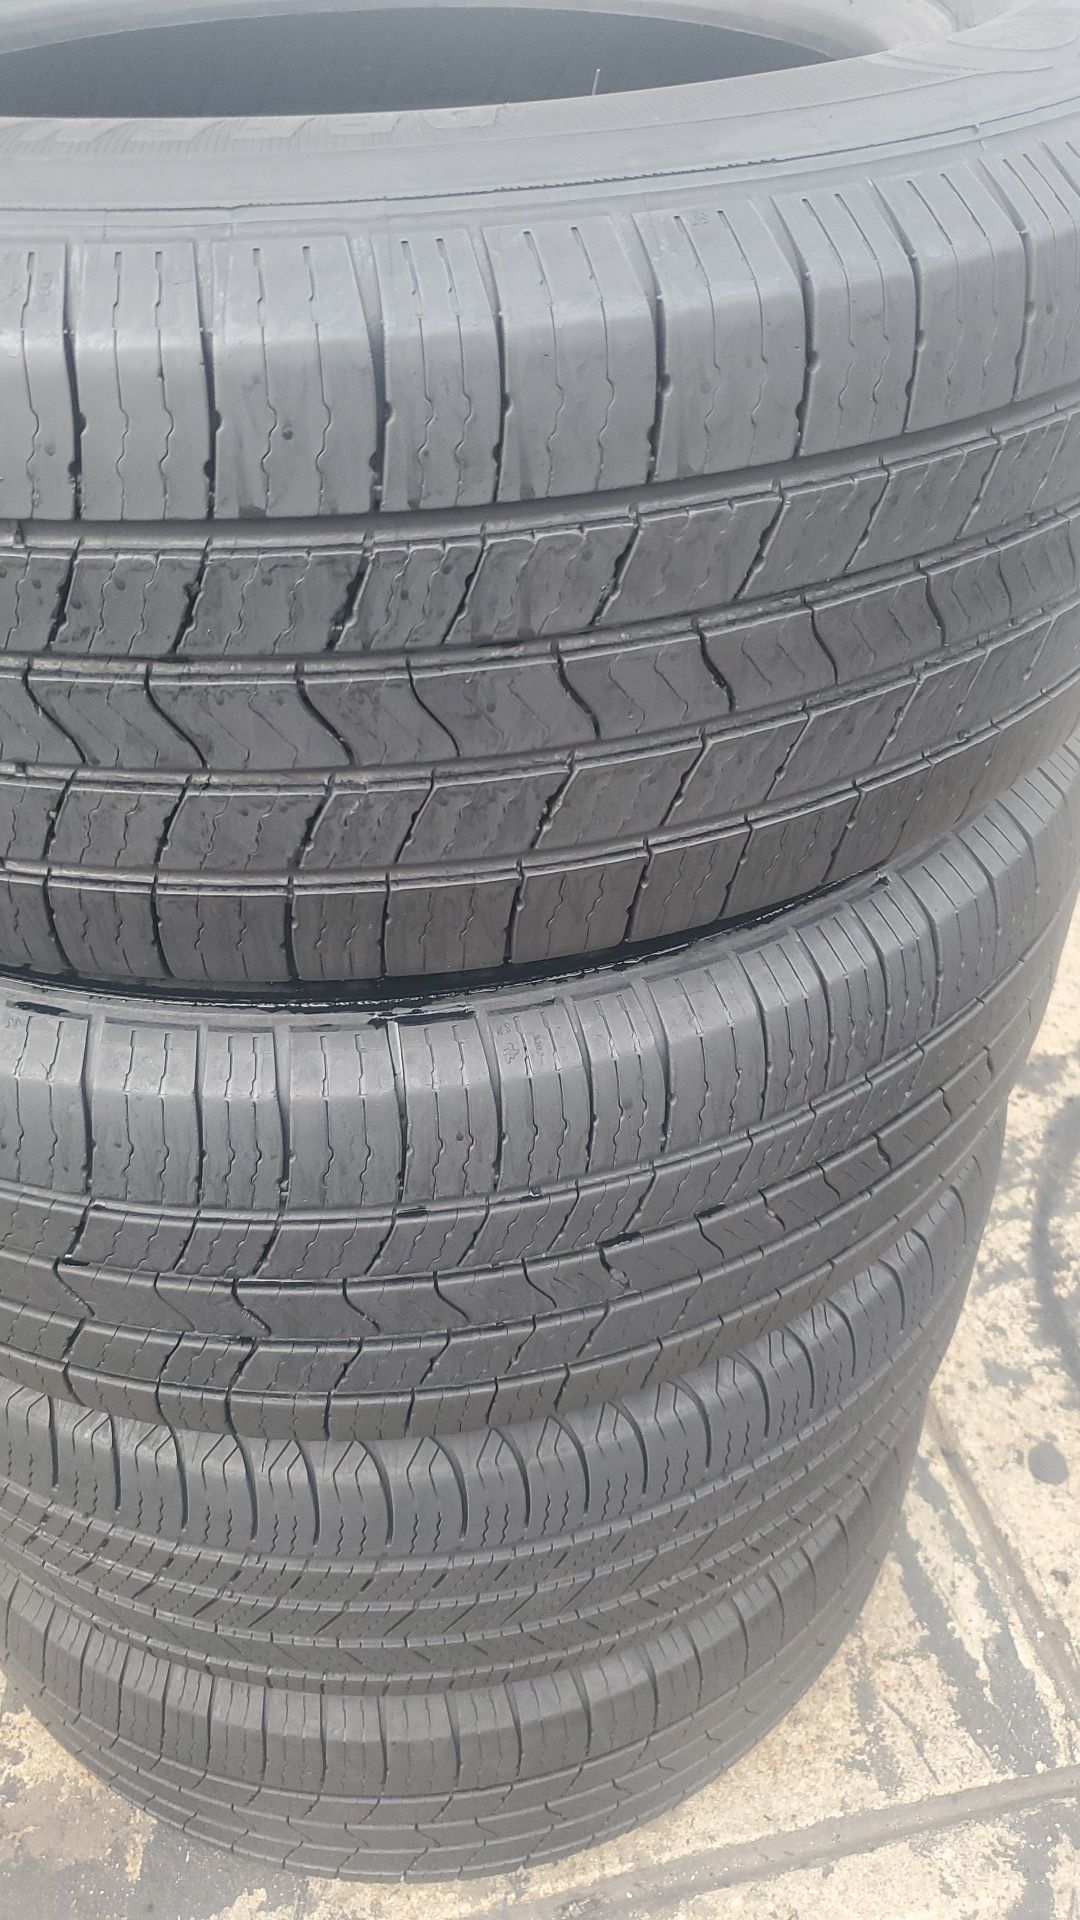 Four MICHELIN tires for sale. 225/60/16